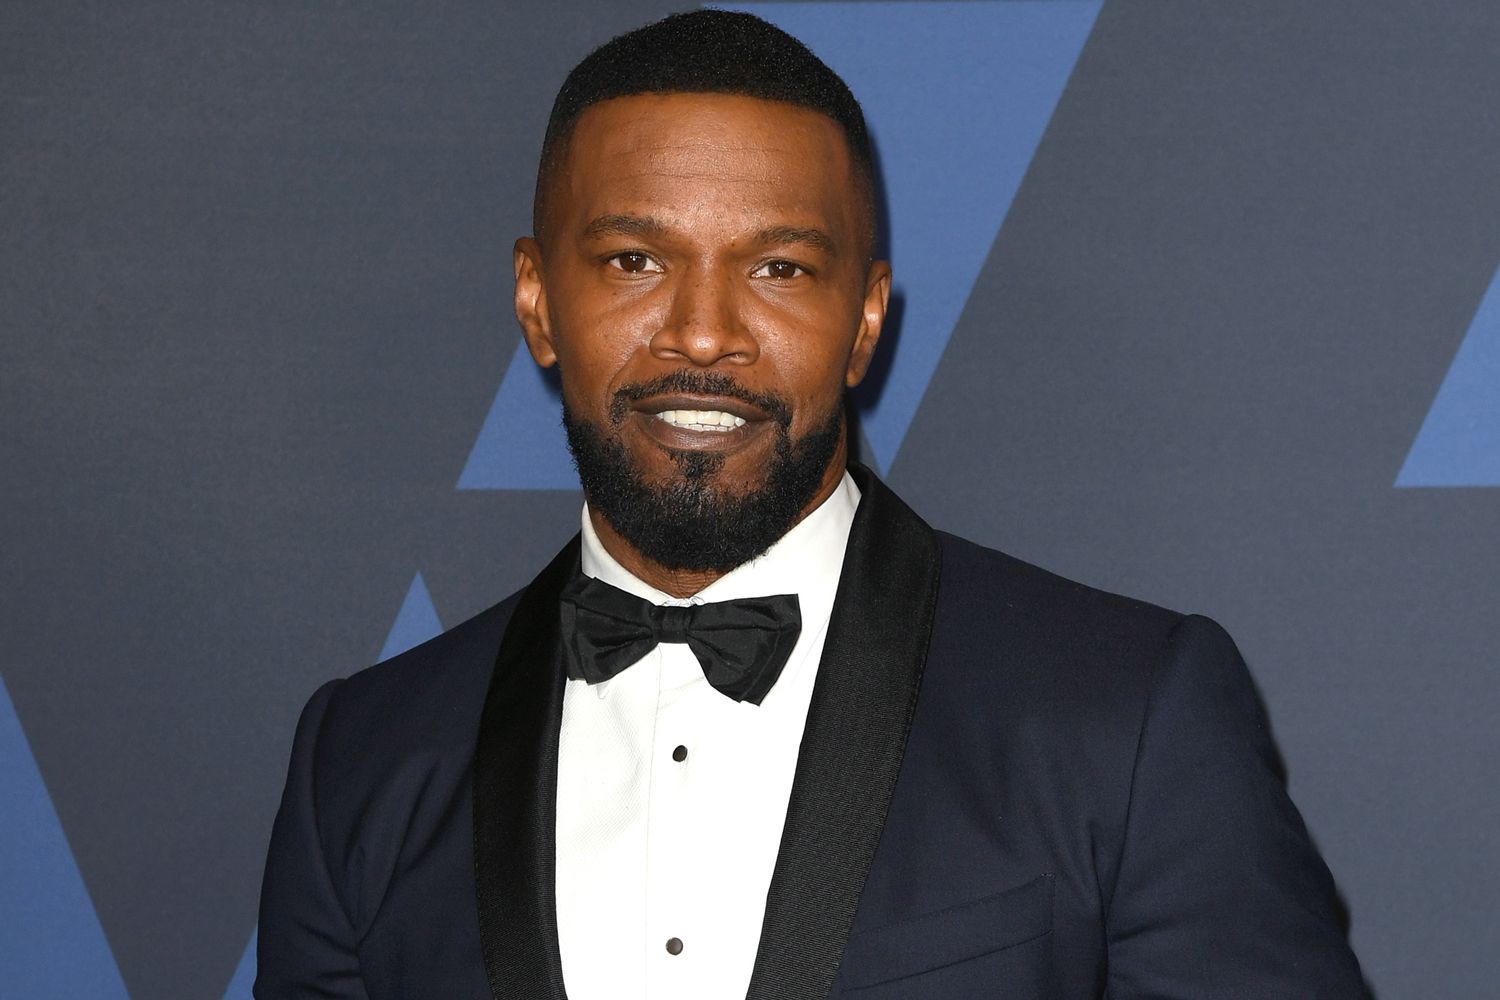 Actor Jamie Foxx remains hospitalized as friends call for prayers